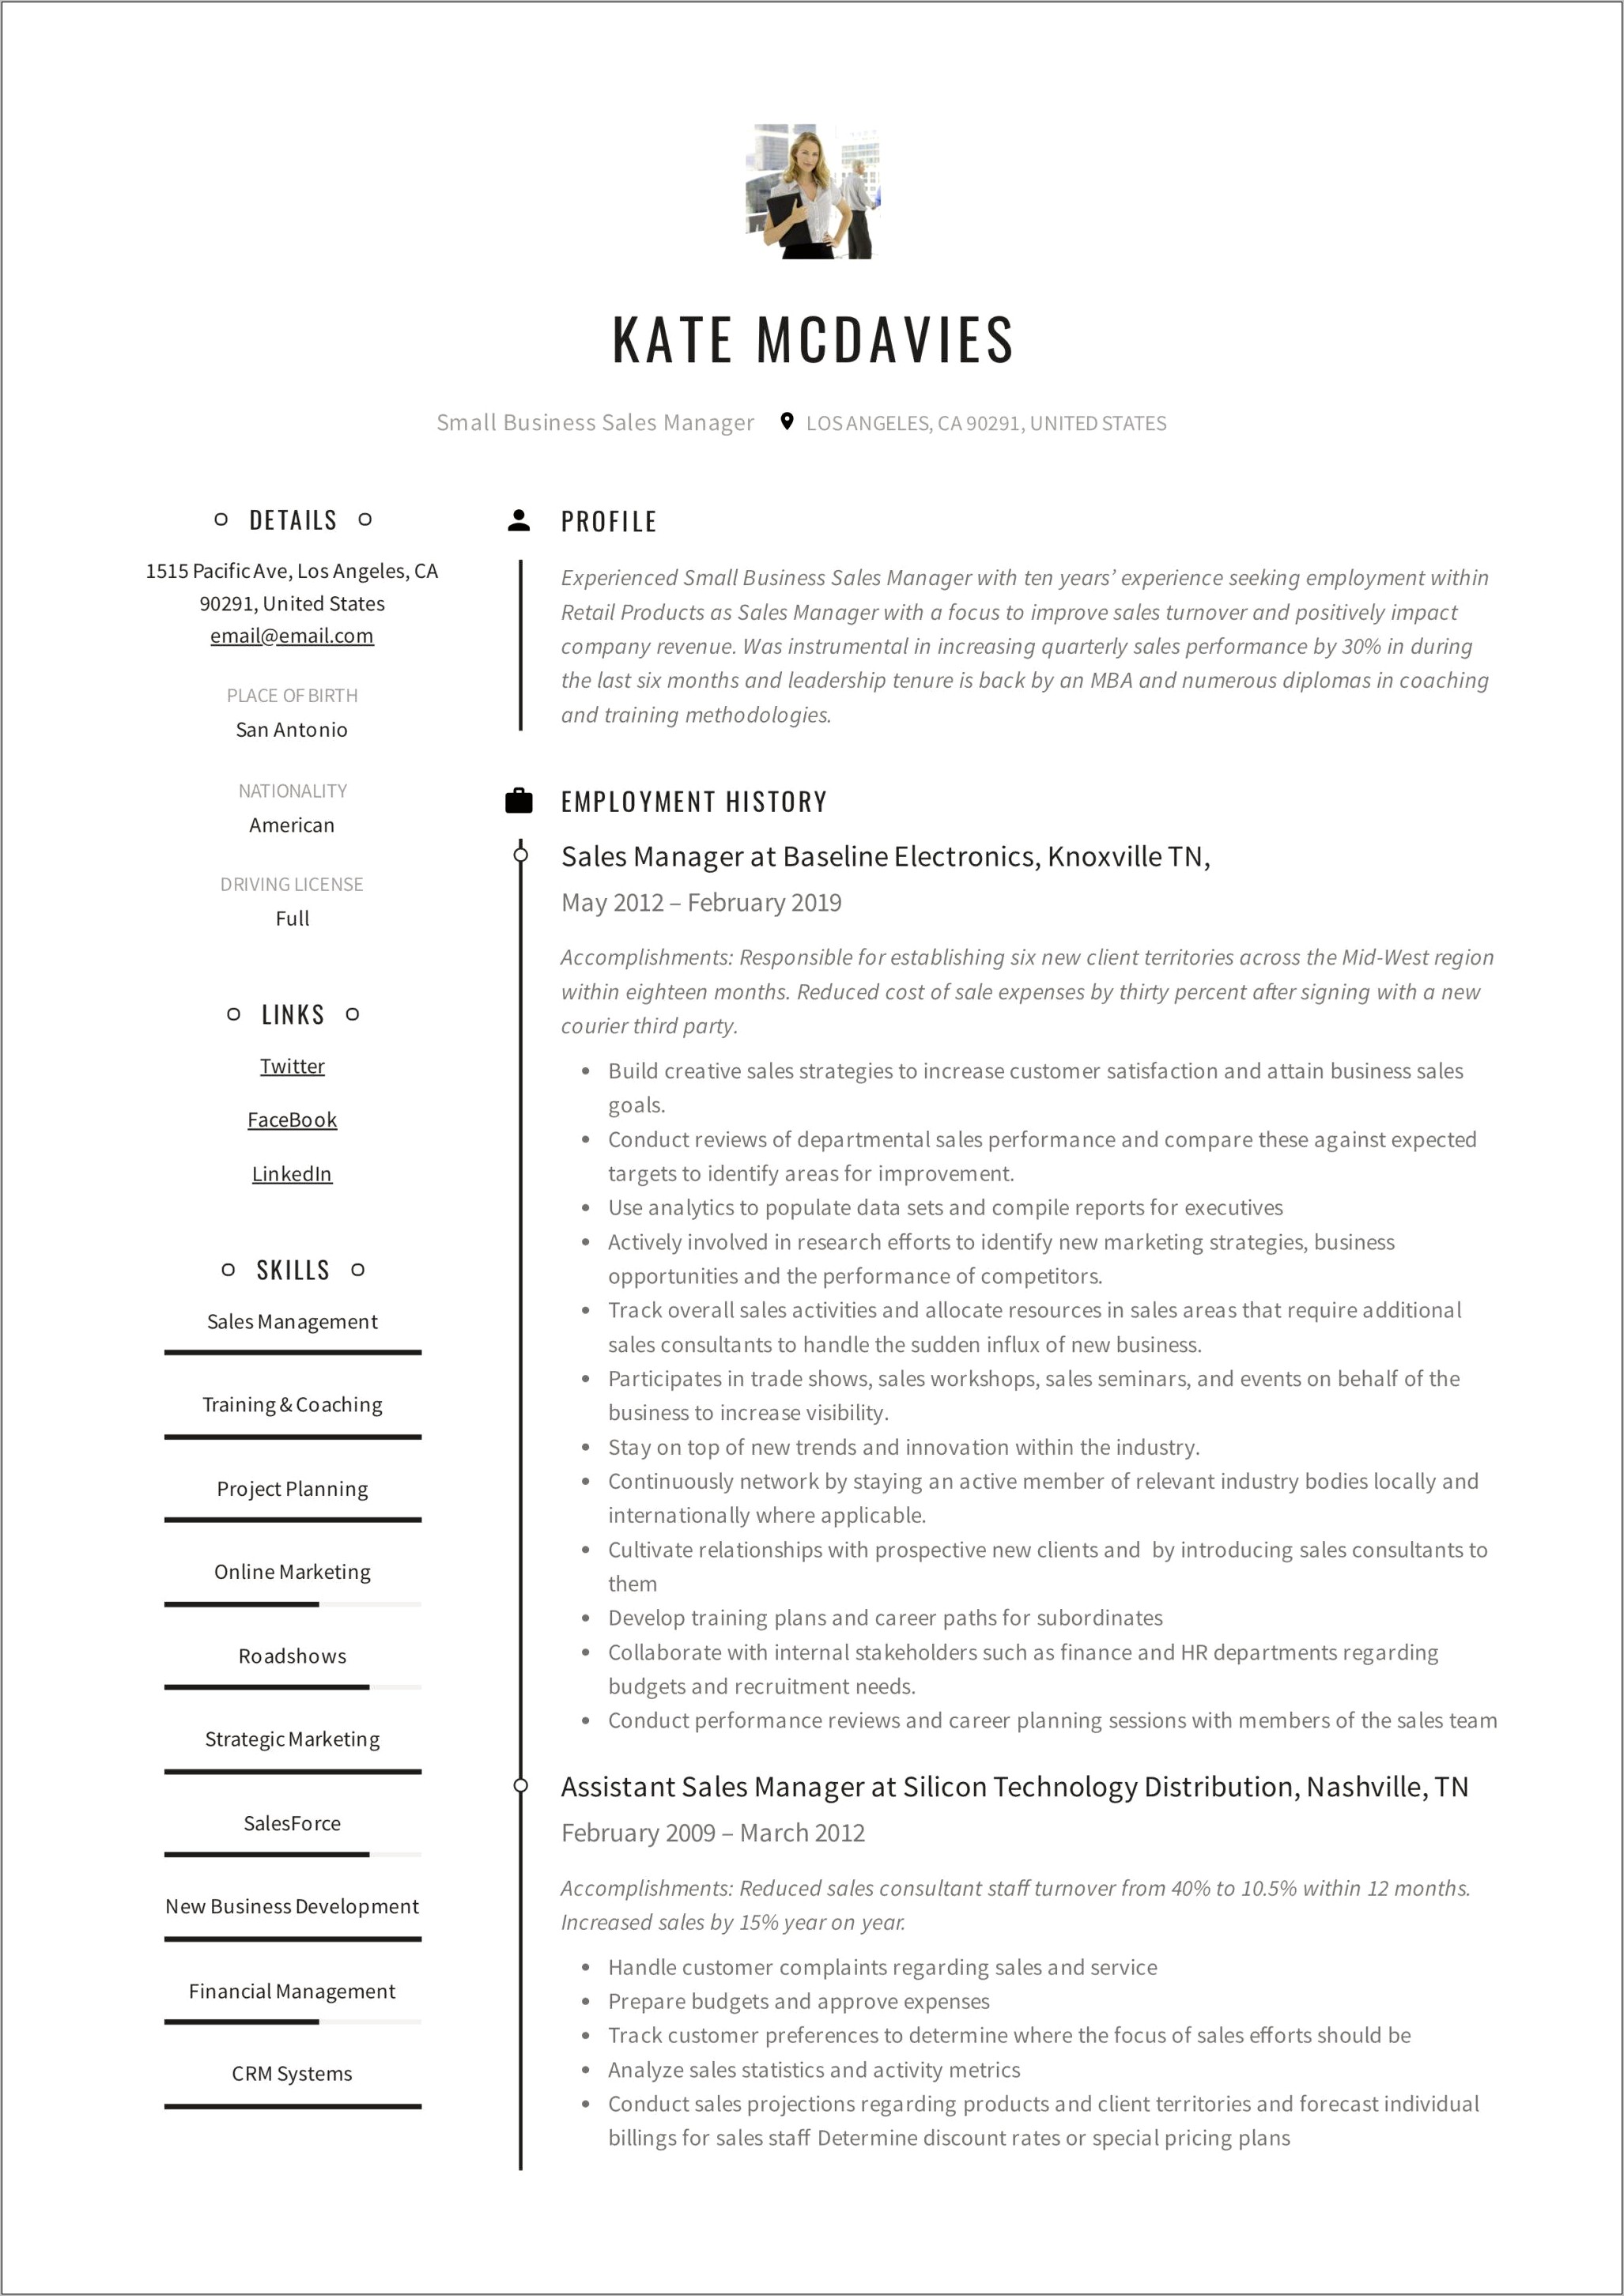 Example Resume Statements For Sales Manager